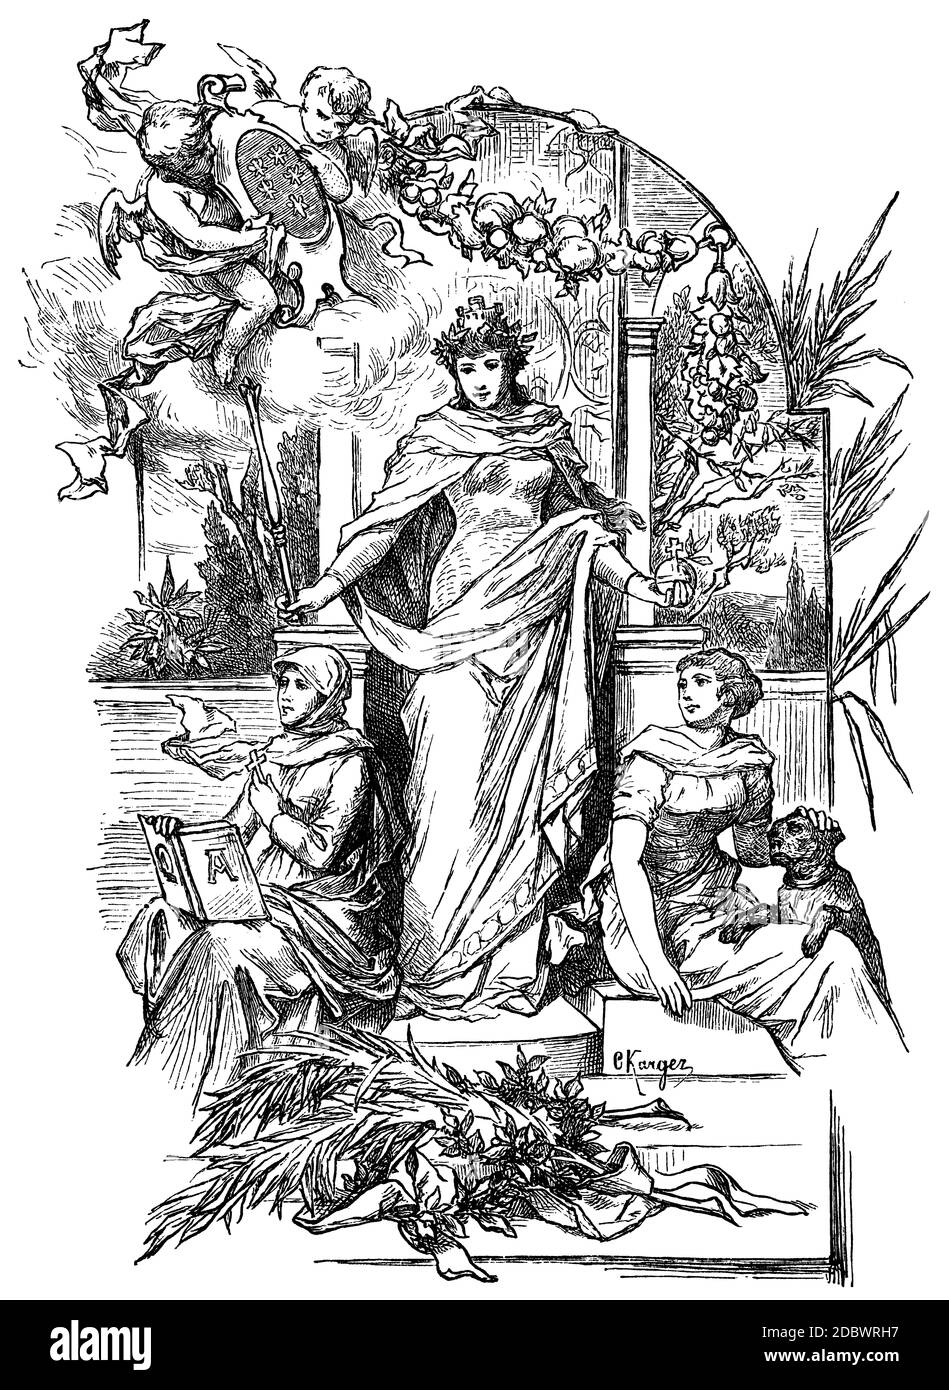 Queen standing on throne, drawing from vintage woodcut of 1888 Stock Photo